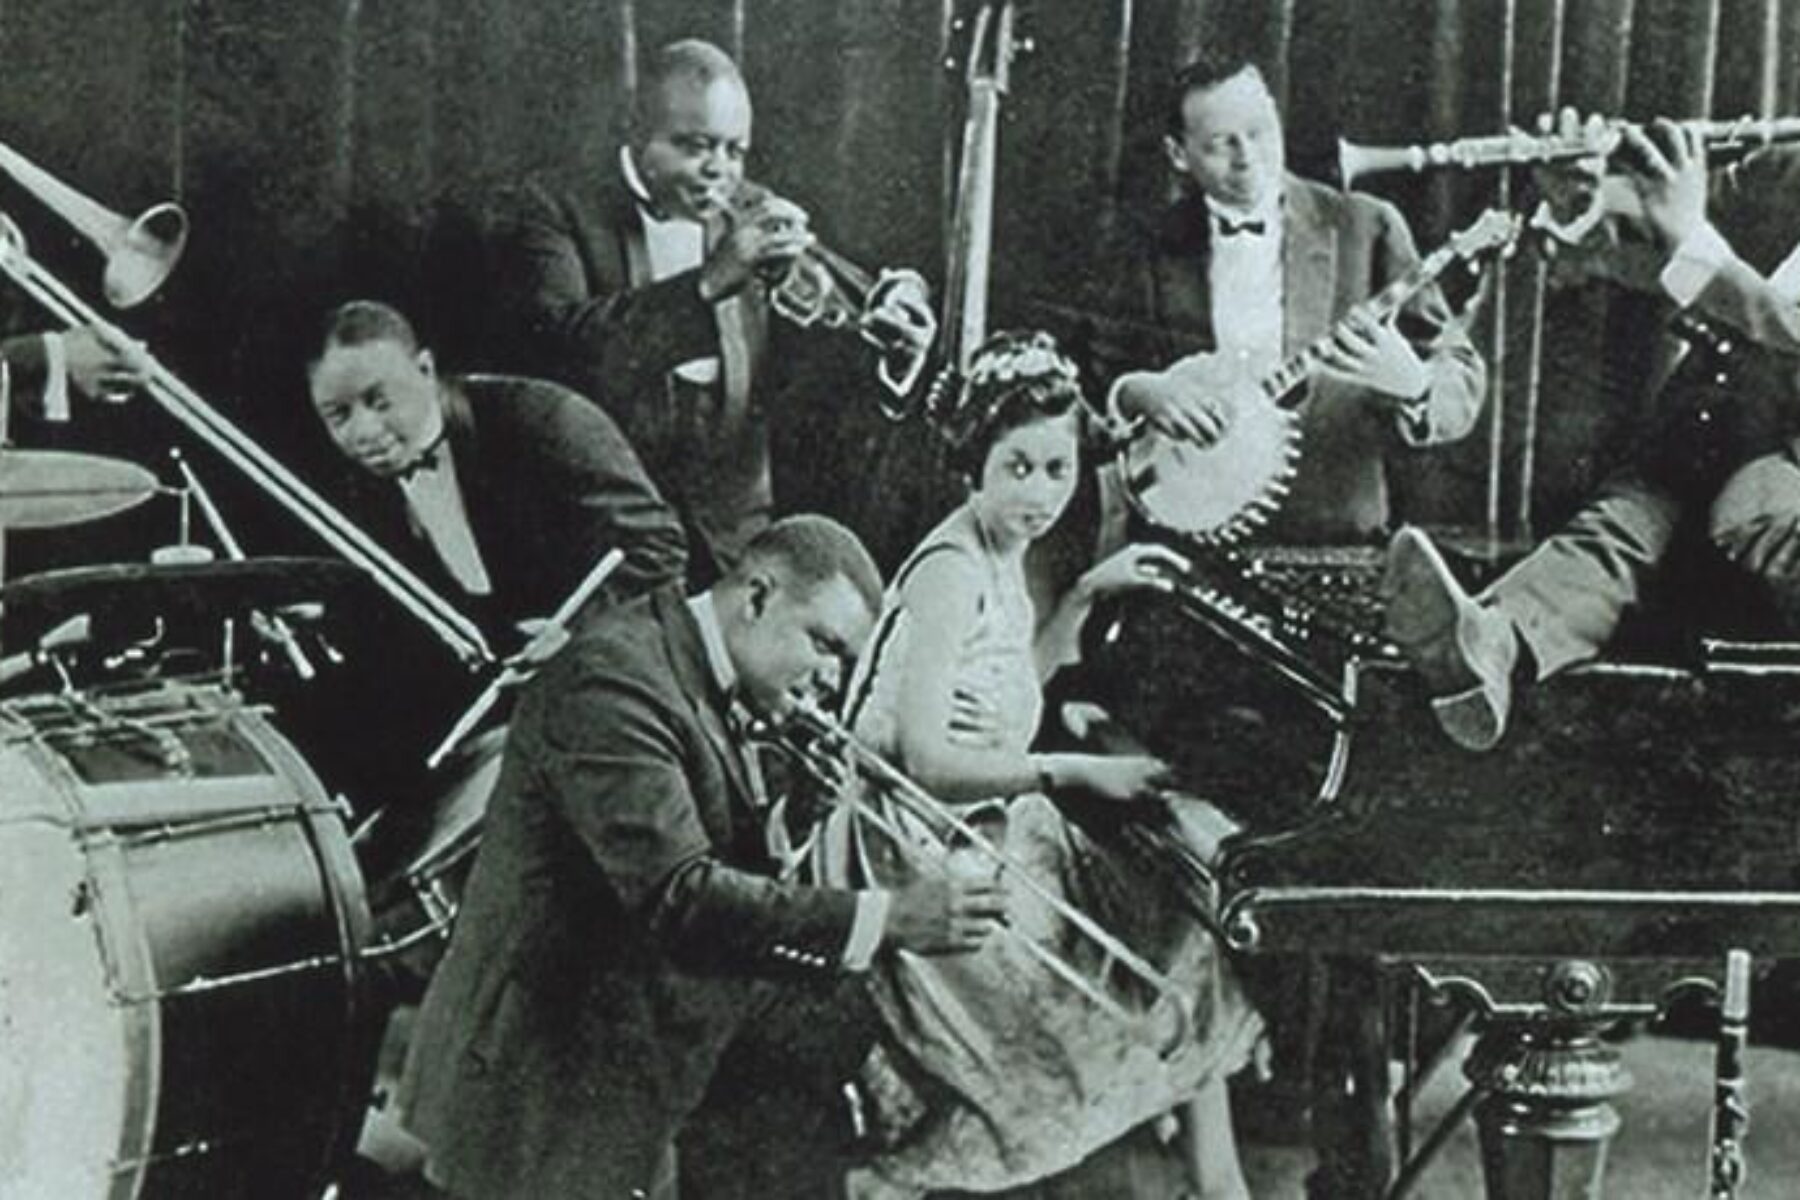 Considered icons of the New Orleans jazz sound, King Oliver’s Creole Jazz Band recorded their debut album in 1923 at Gennett Records in Richmond, Indiana. | Courtesty Charlie Dahan